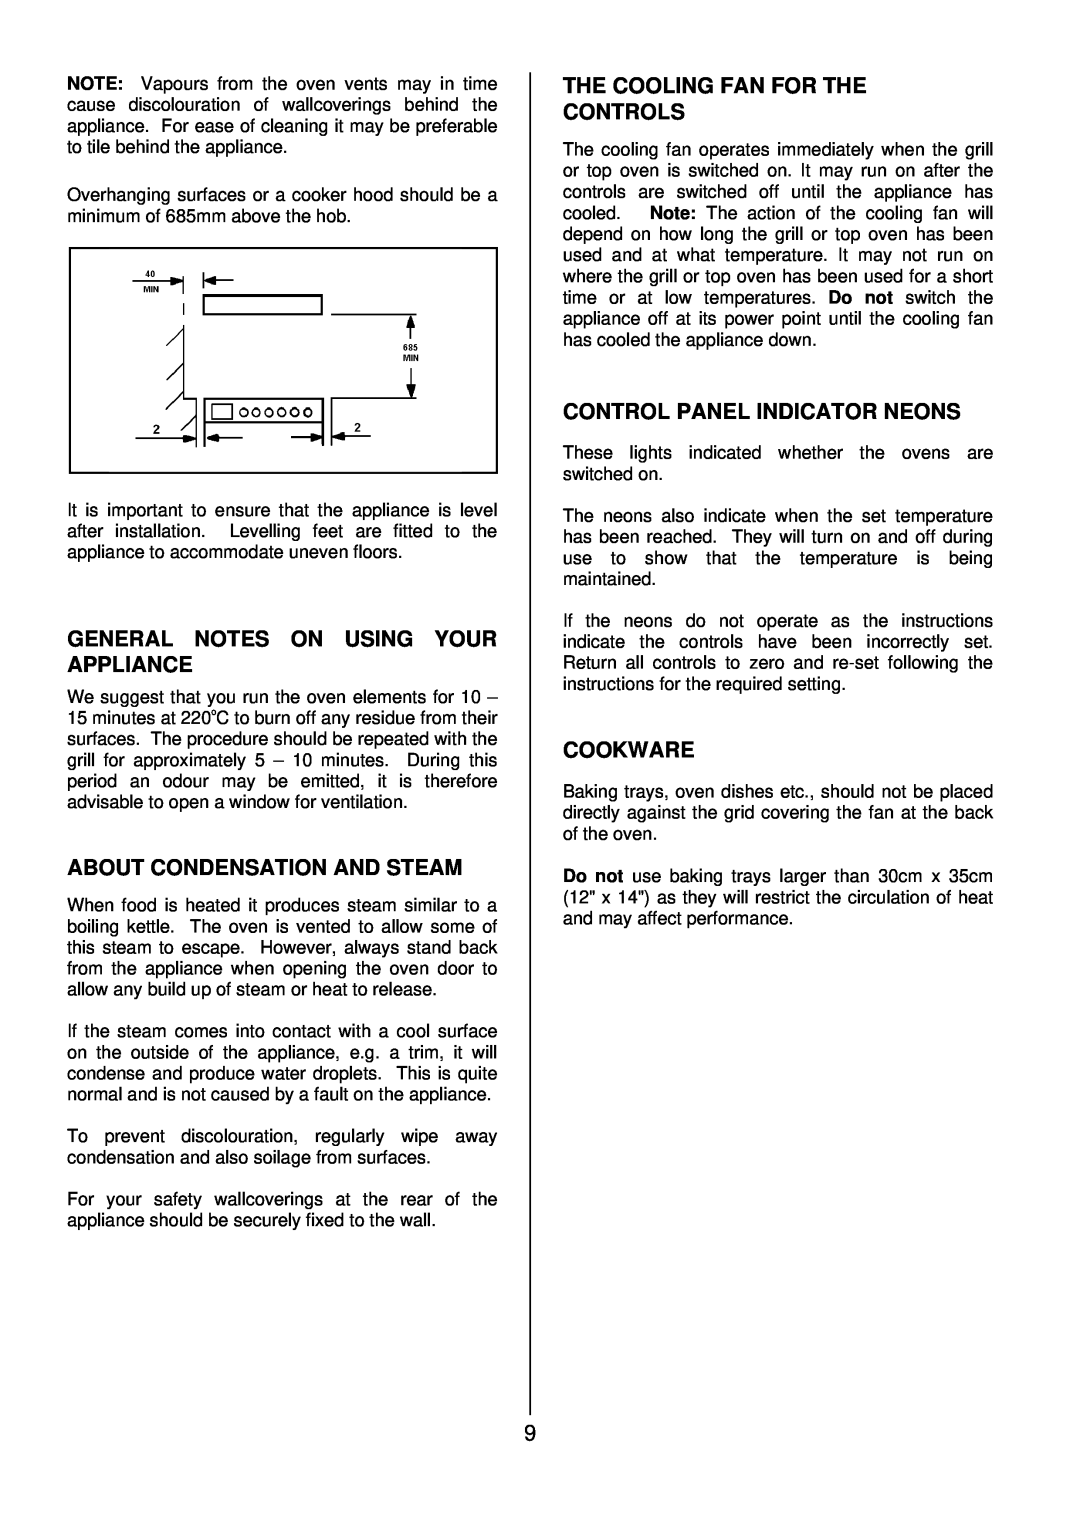 Tricity Bendix SIE501 General Notes On Using Your Appliance, About Condensation And Steam, Control Panel Indicator Neons 